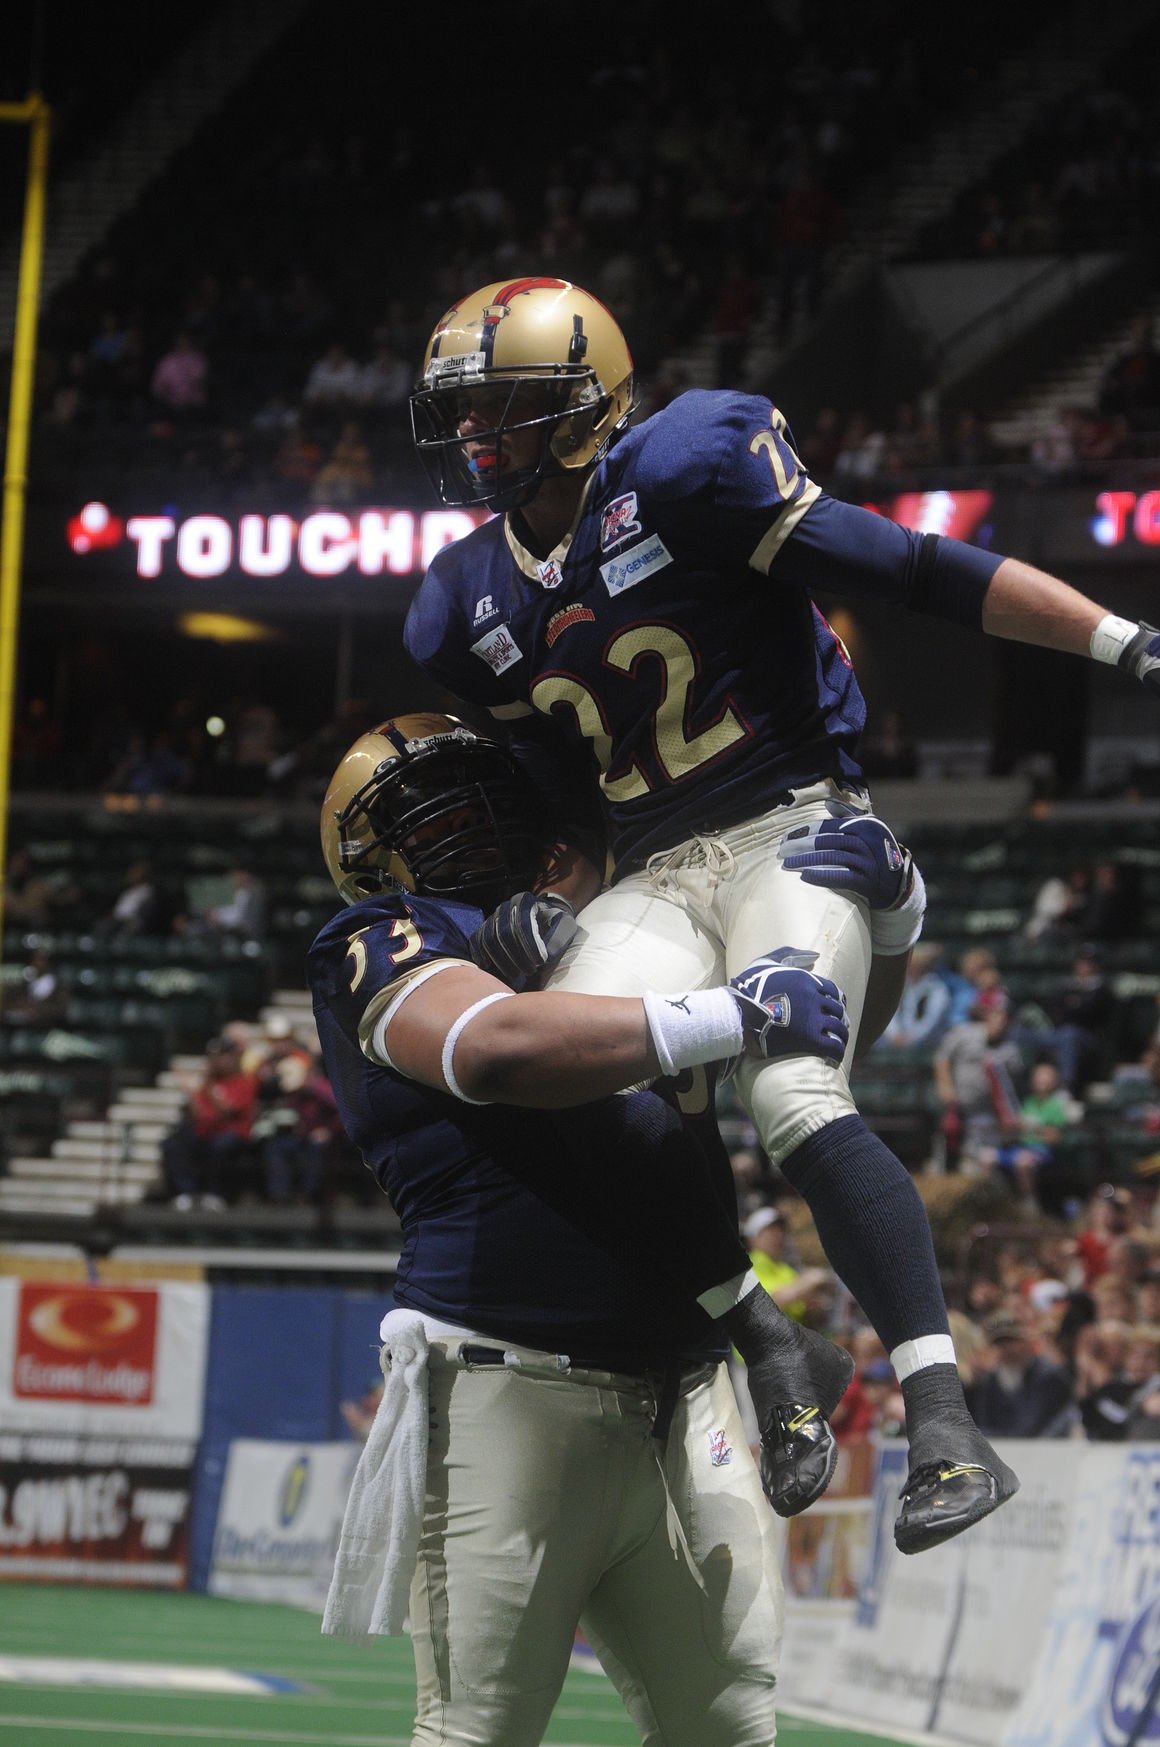 Steamwheelers back! CIF expansion club debuts in Feb. 2018